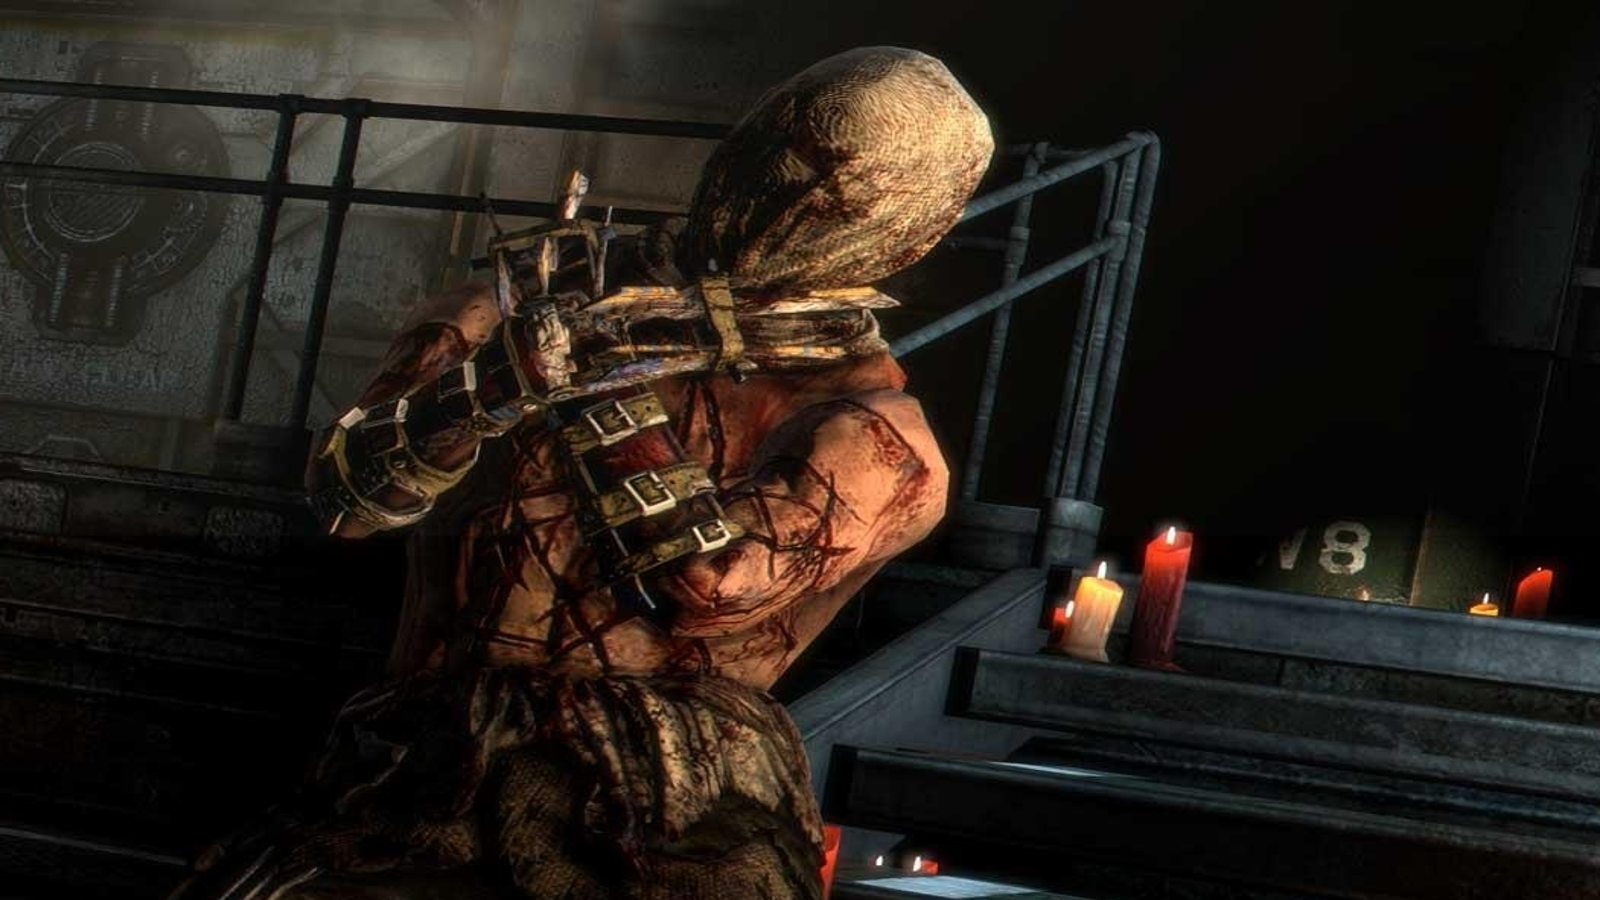 Dead Space 3 - Game Overview